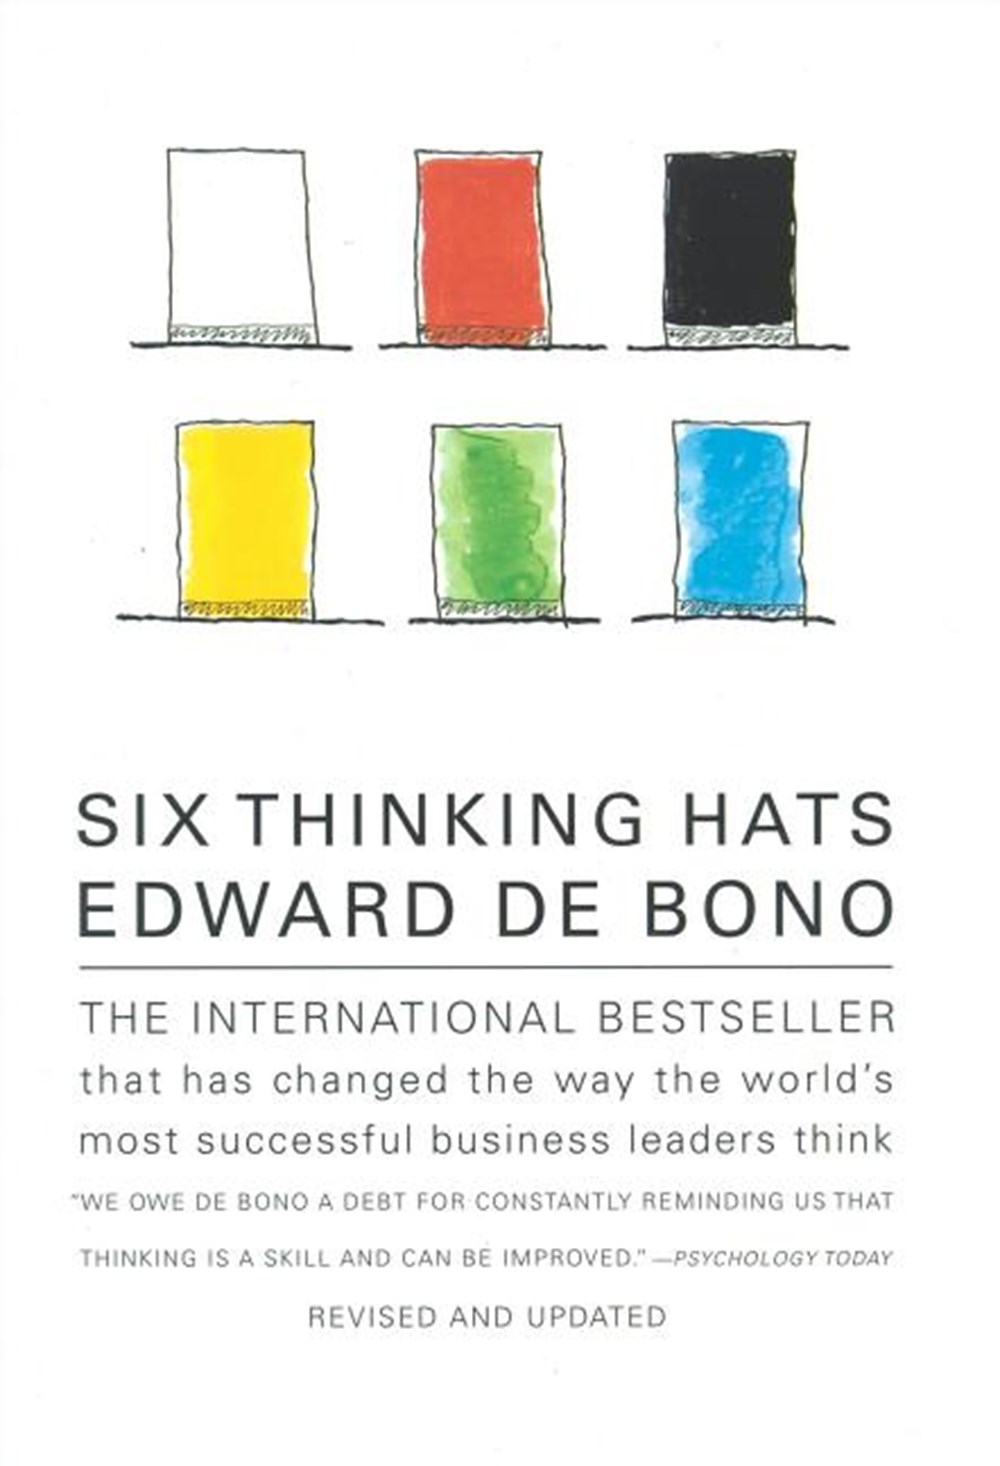 Six Thinking Hats An Essential Approach to Business Management (Revised and Updated)